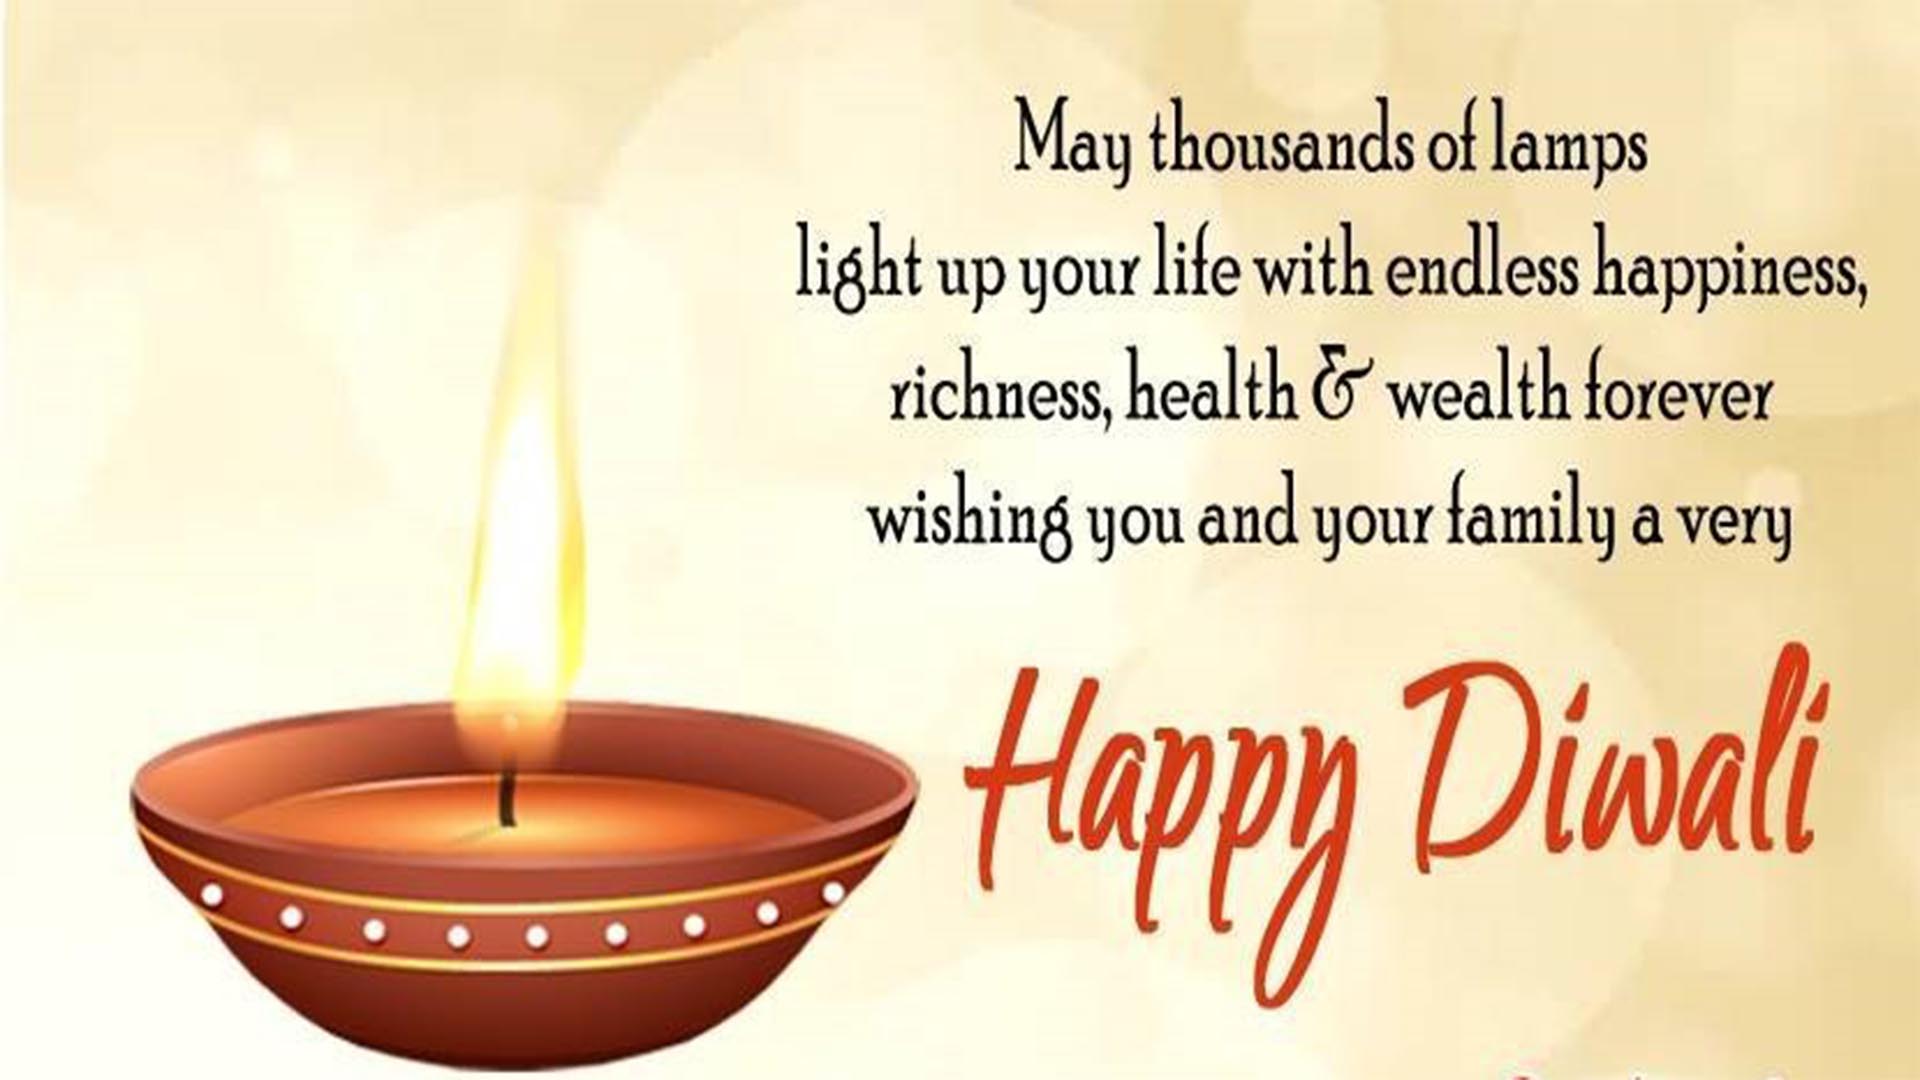 Happy Diwali Greetings Images| Diwali Wishes & Messages